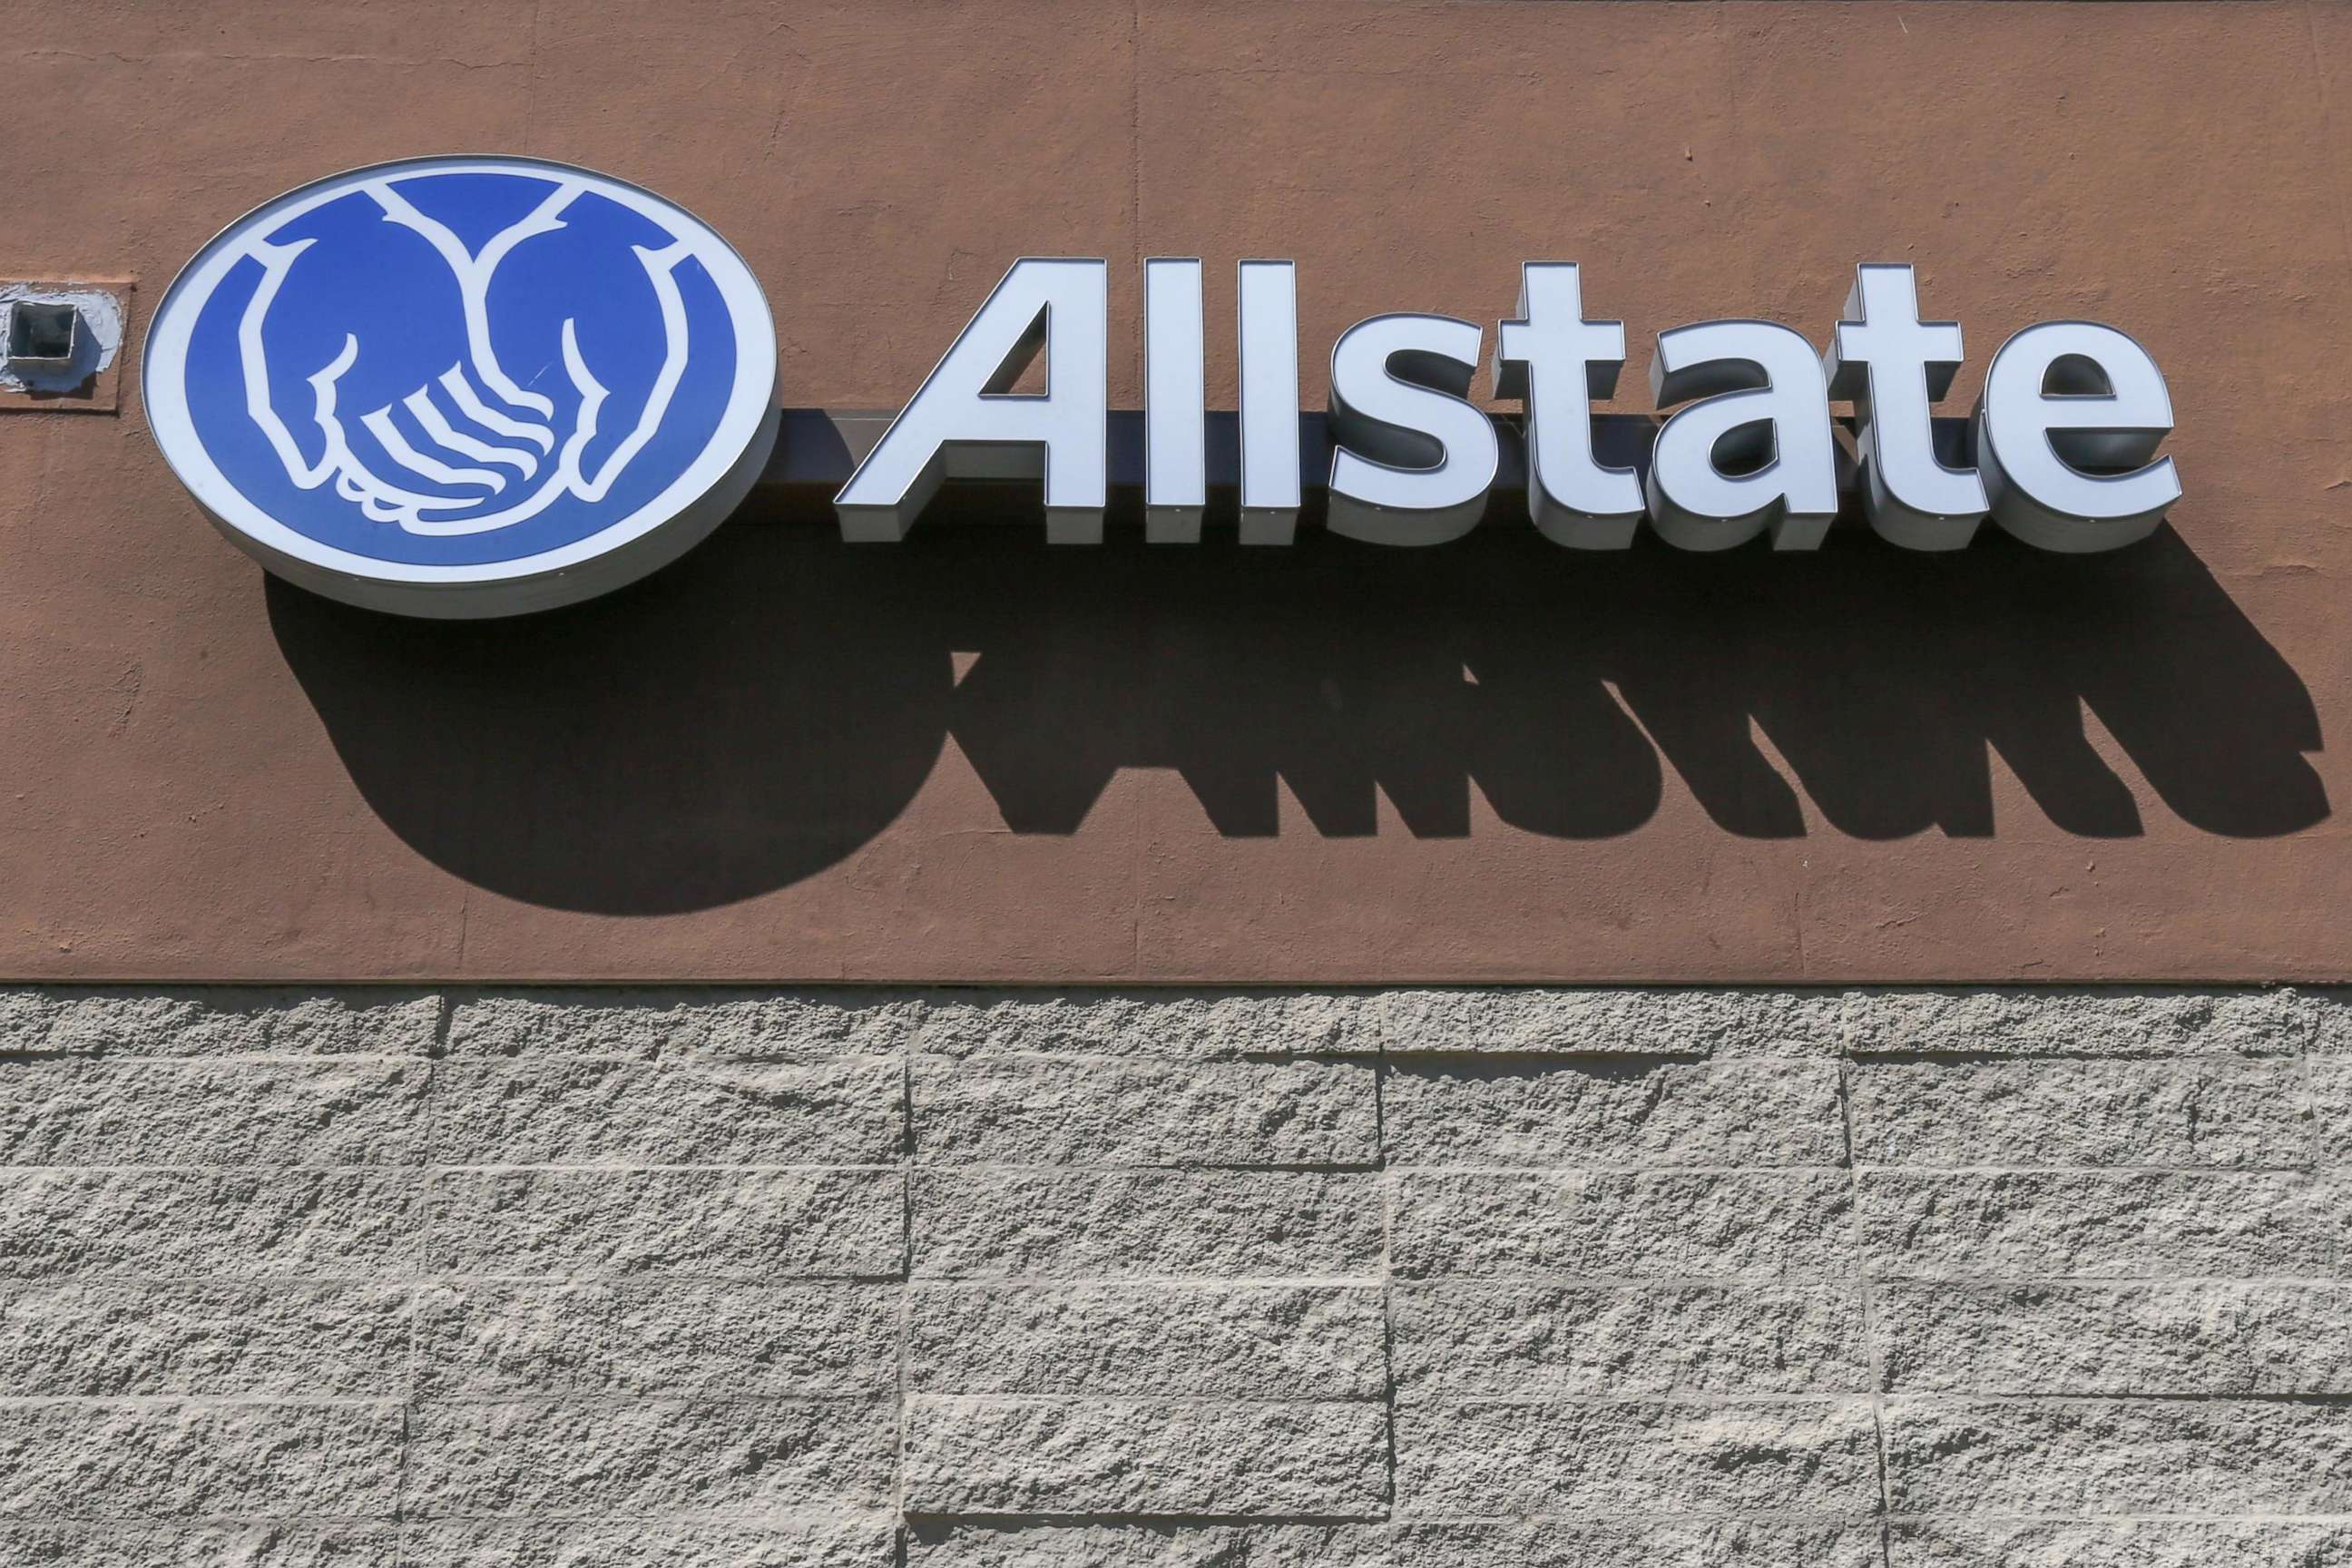 PHOTO: In this March 26, 2020, file photo, an Allstate Insurance logo sign is shown in Los Angeles, Calif.